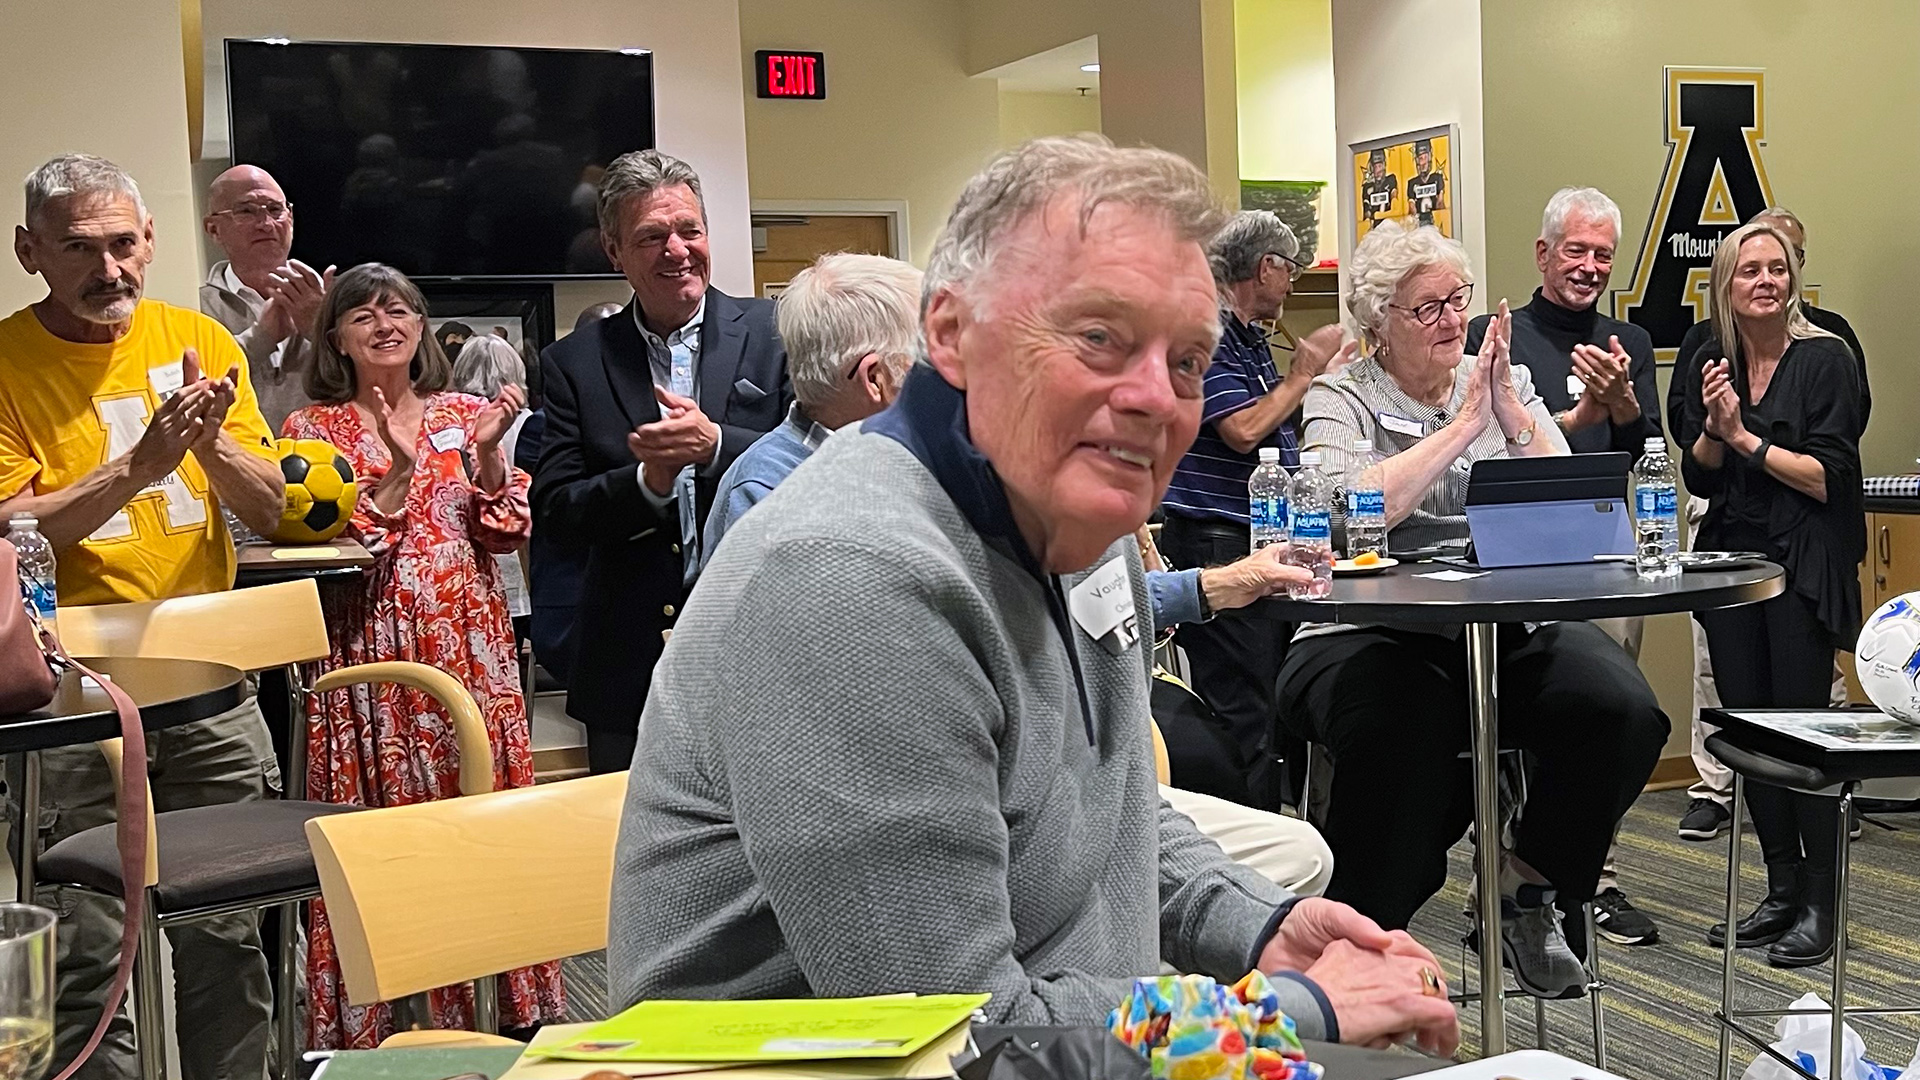 Coach Christian soaks in the applause at the surprise eightieth birthday party thrown by his former players and their families (photograph by Ethan Joyce).